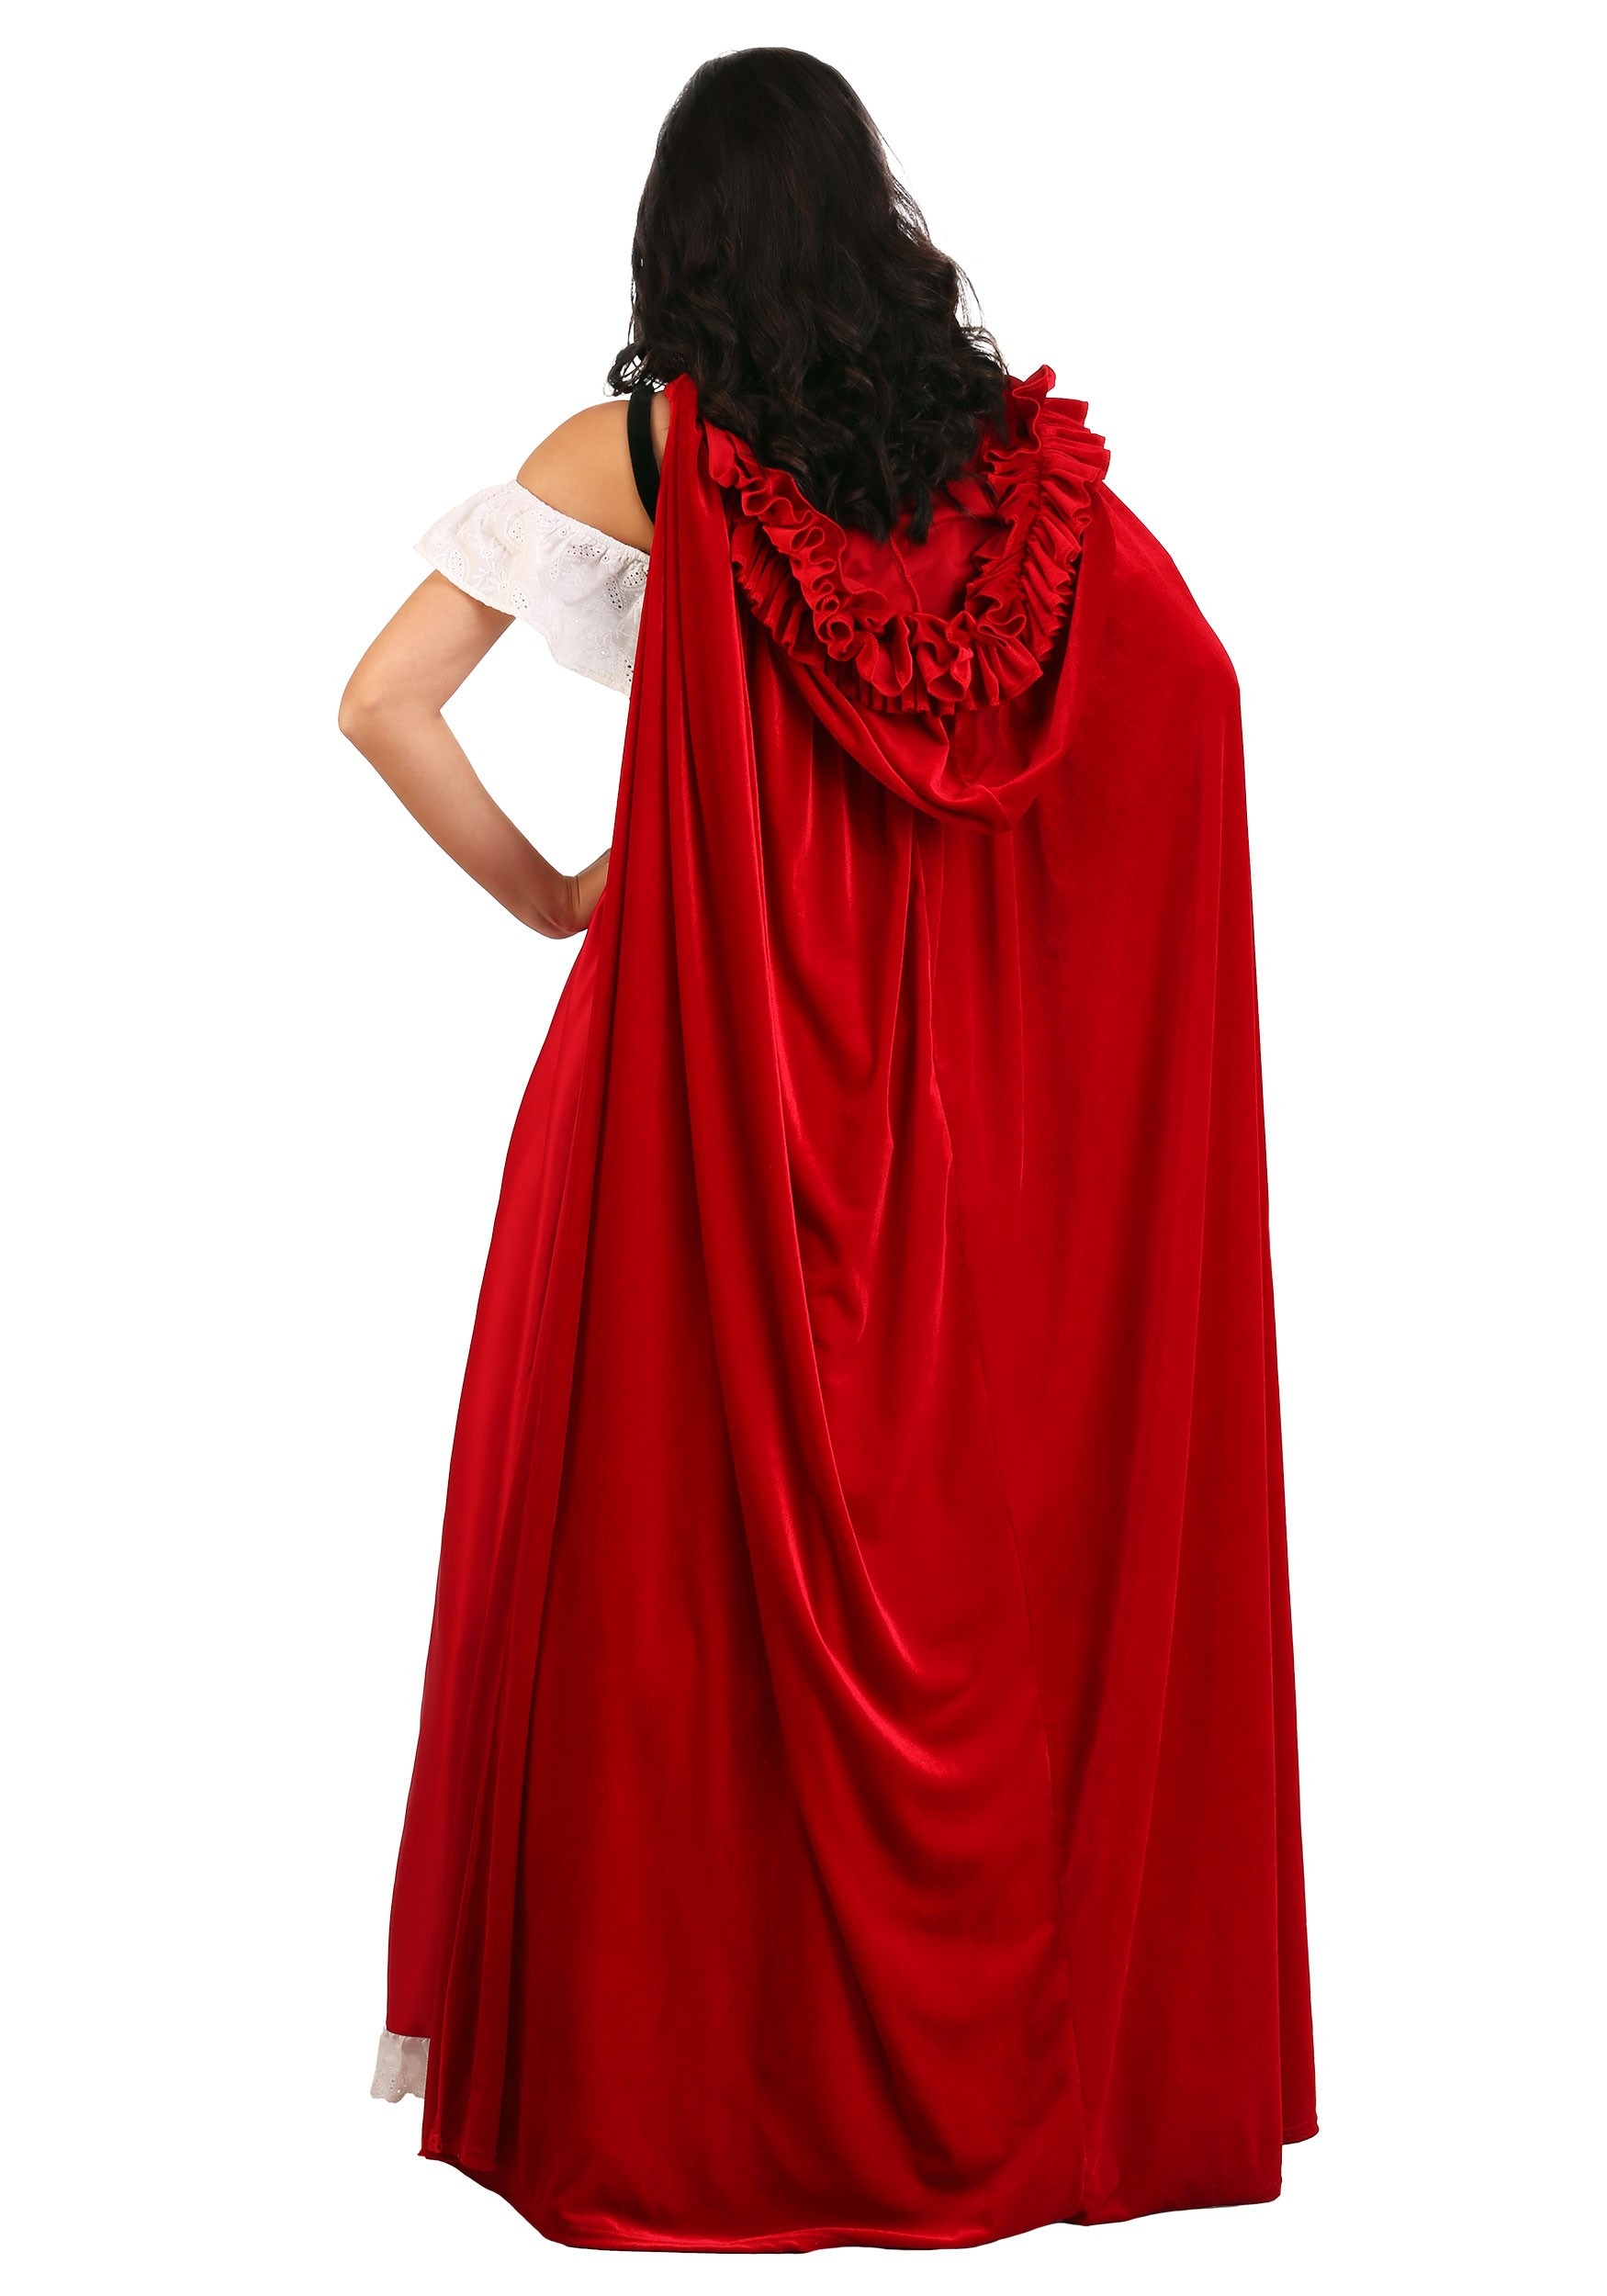 Plus Size Deluxe Red Riding Hood Fancy Dress Costume